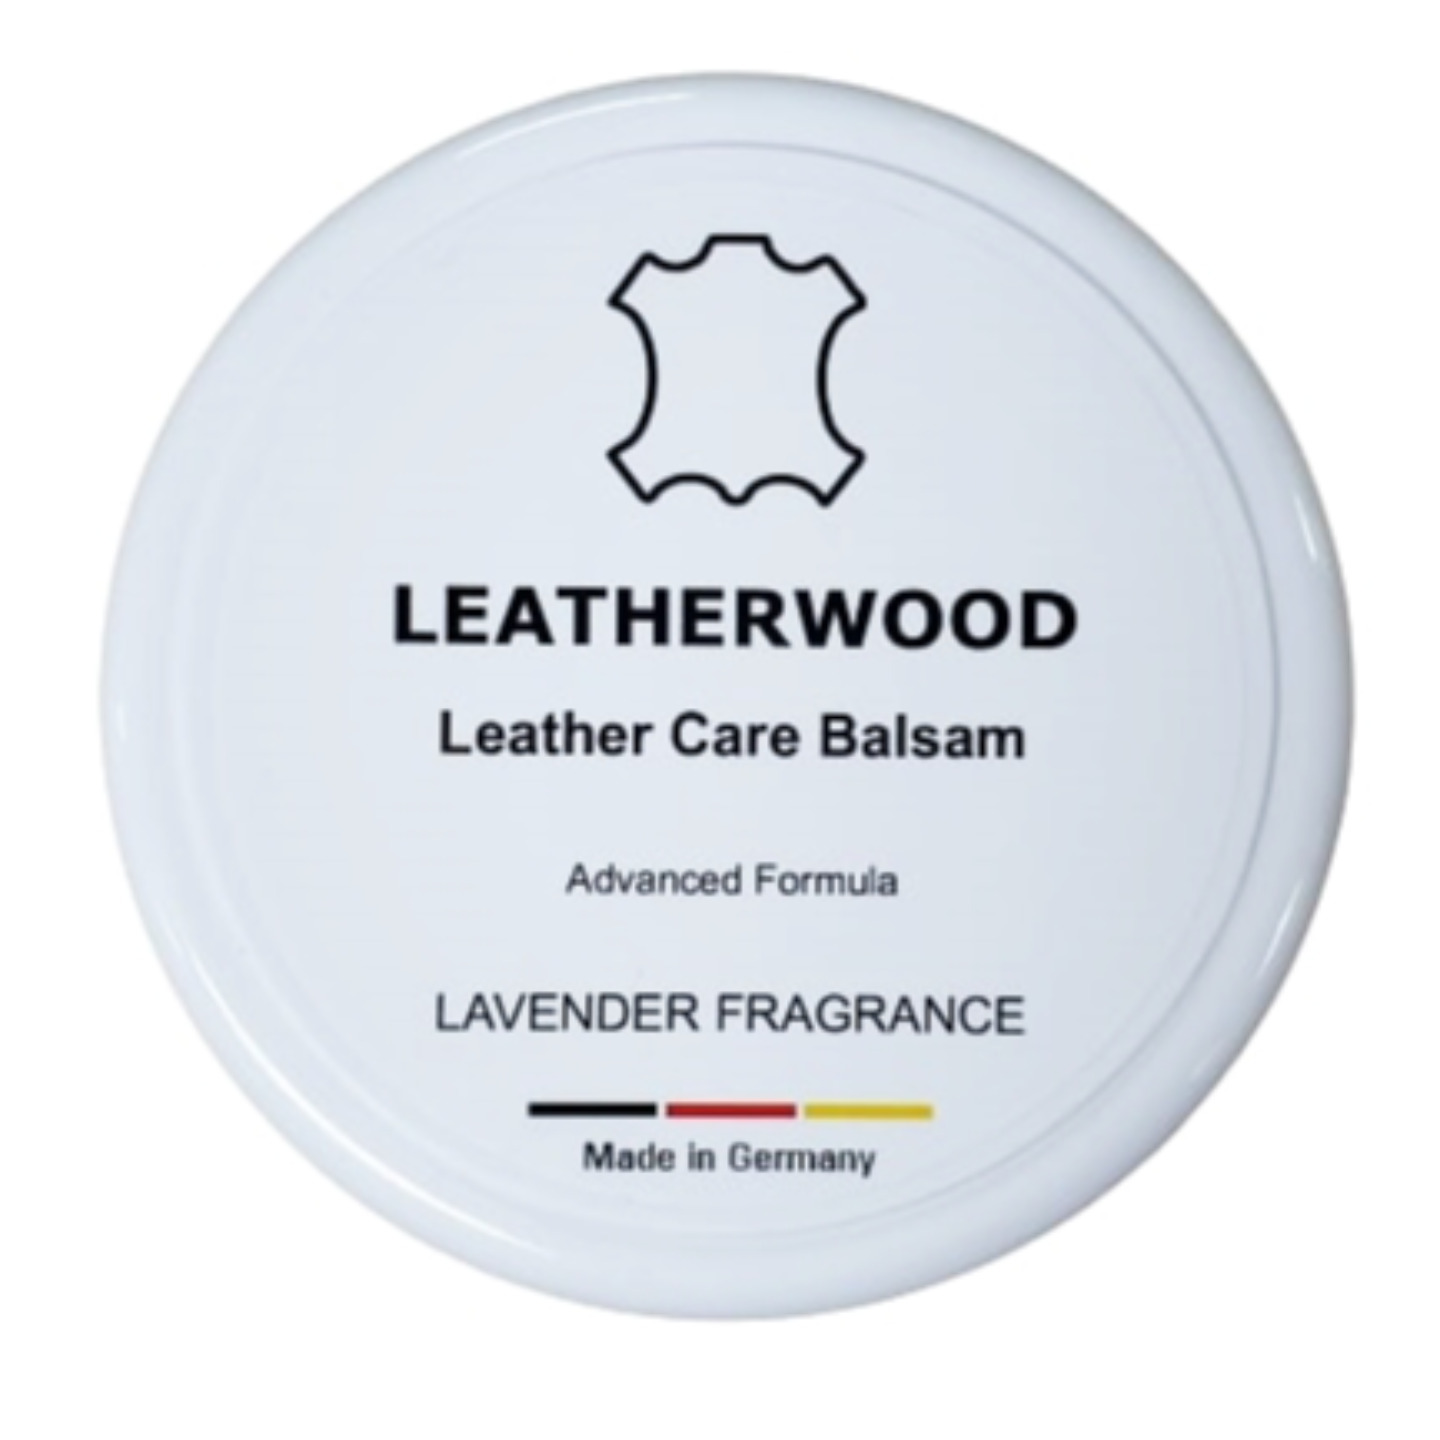 Leatherwood Balsam 250ml - LAVENDER - Cleaner, Conditioner ,Water Repellent - All Leathers including Shoes, Handbags, Garments, Furniture, Automotive Leathers - Made in Germany.